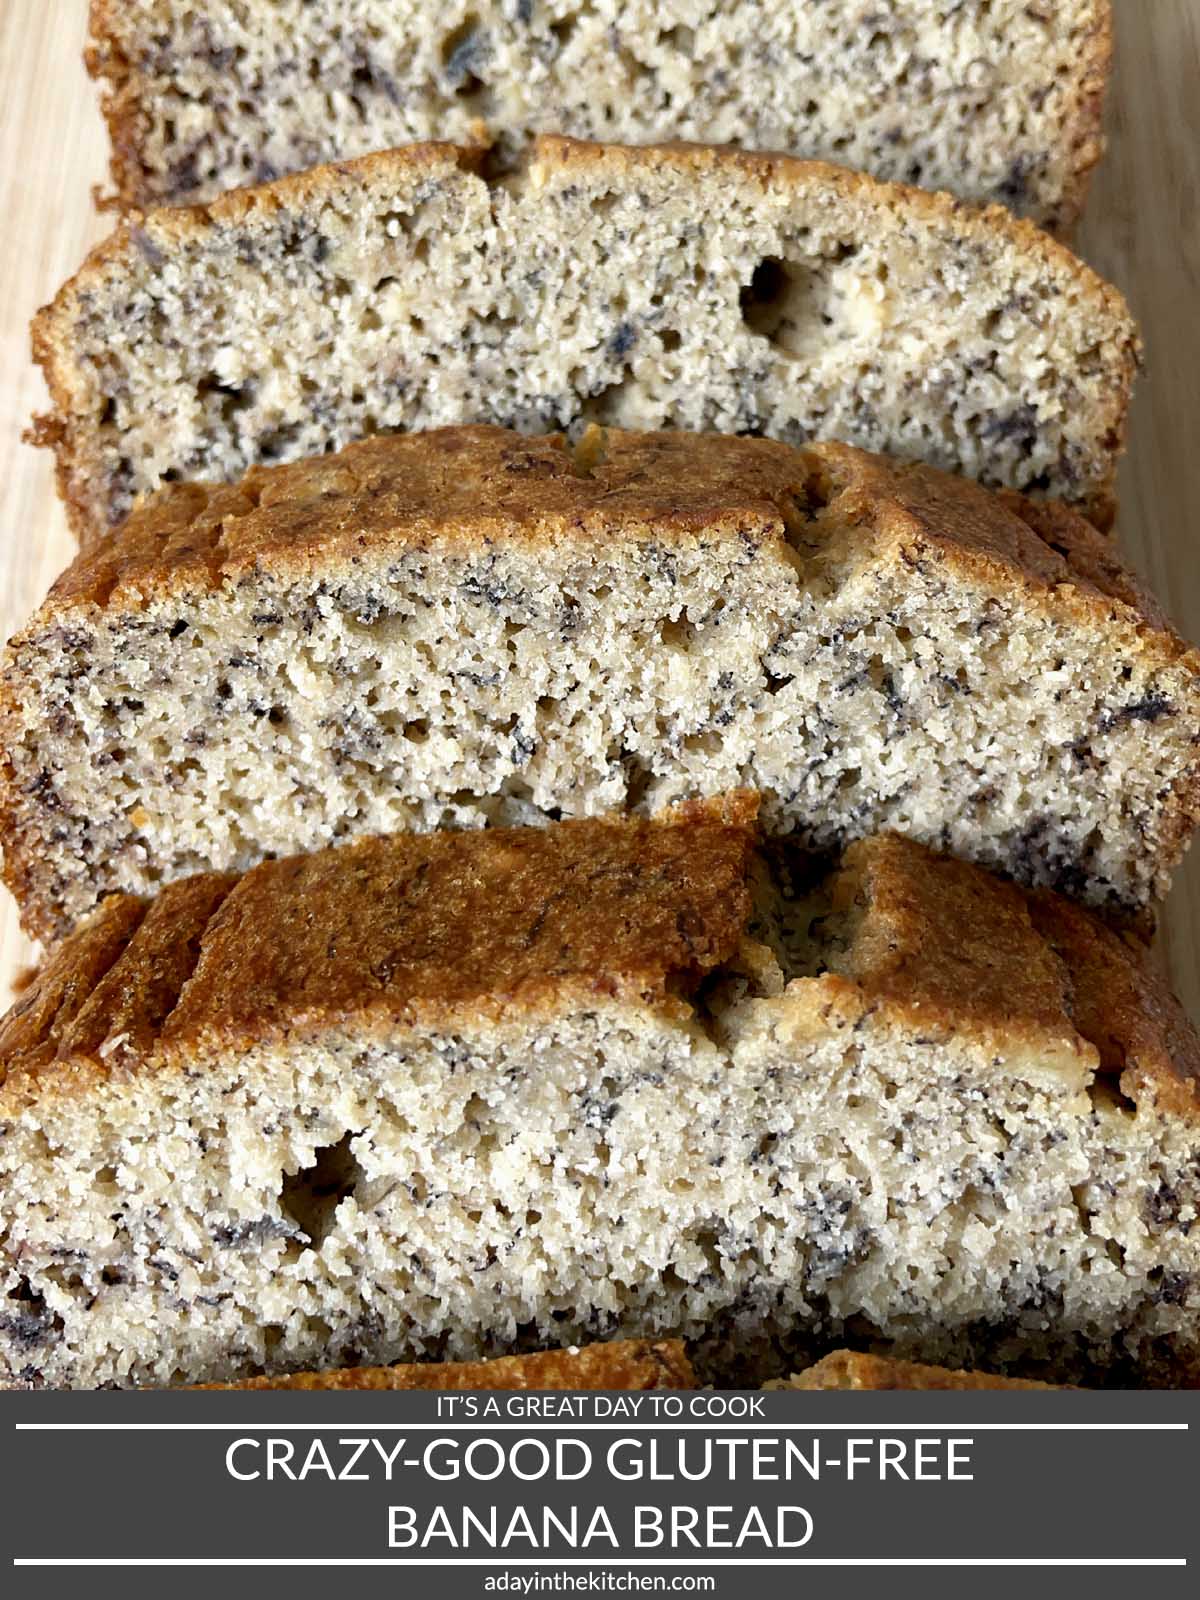 Close-up of slices of bread. Crazy-Good Gluten-Free Banana Bread.